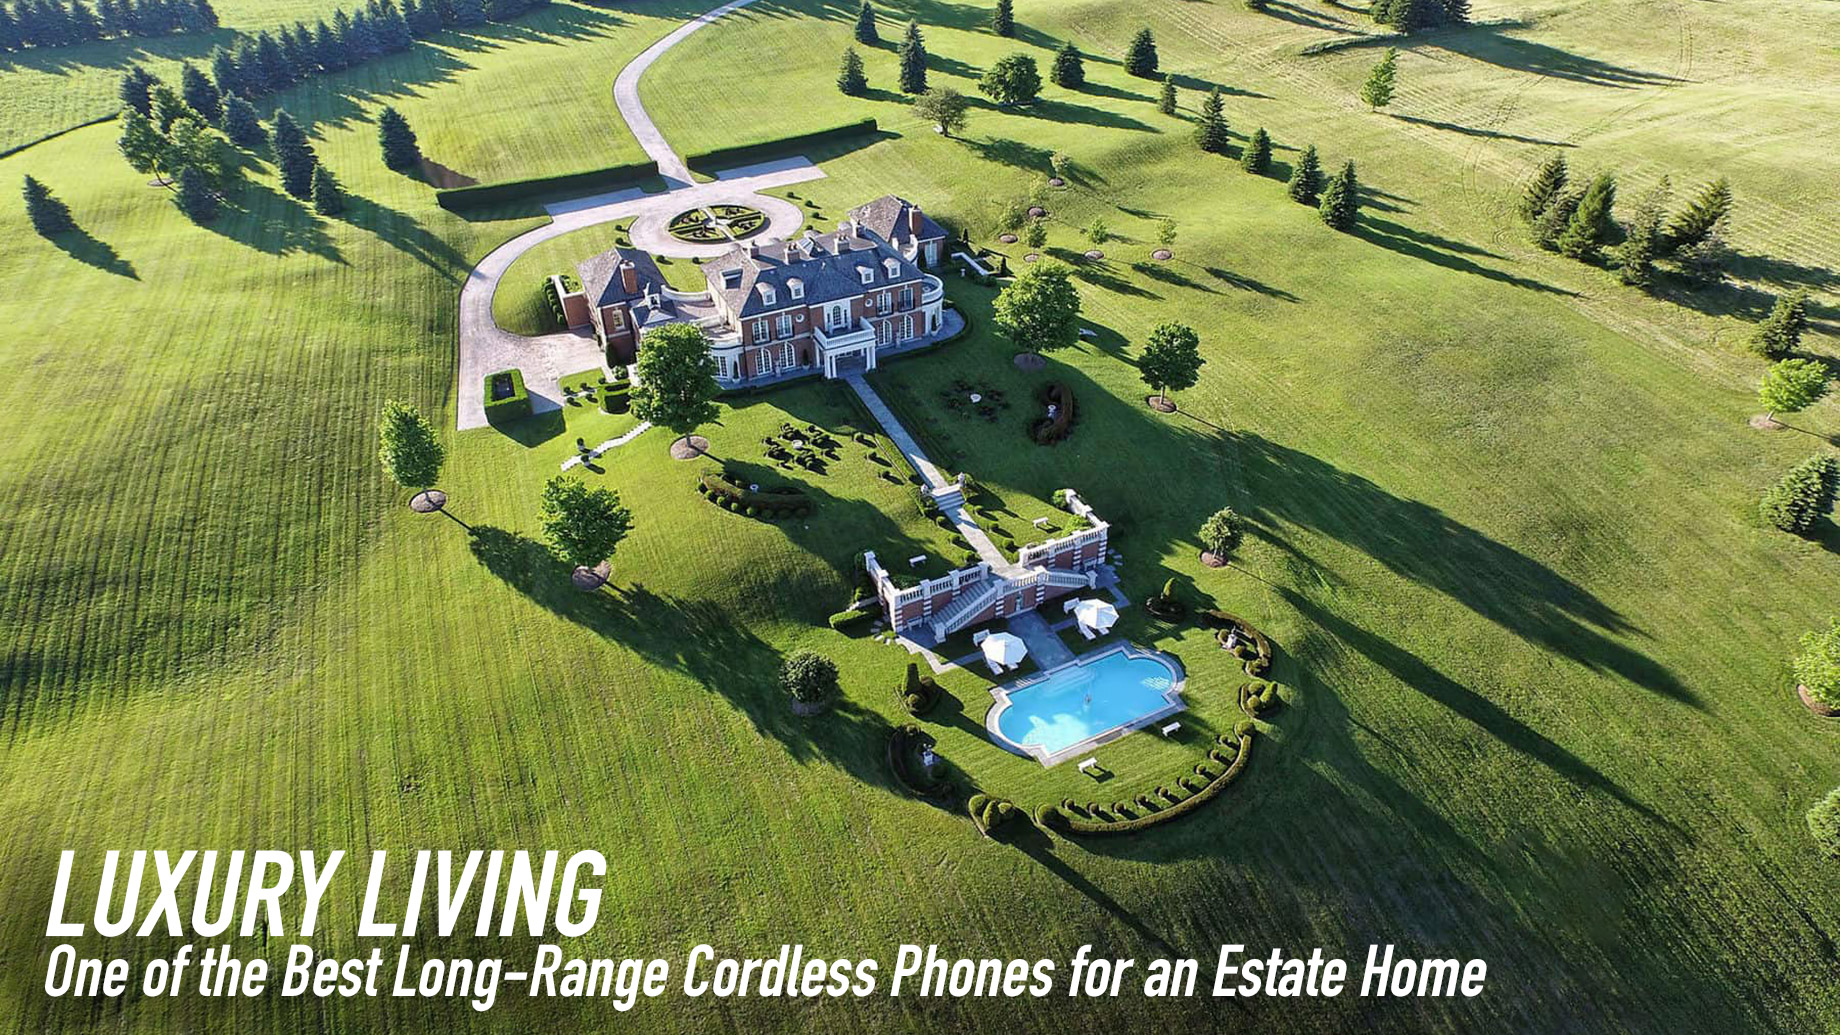 Luxury Living – One of the Best Long-Range Cordless Phones for an Estate Home